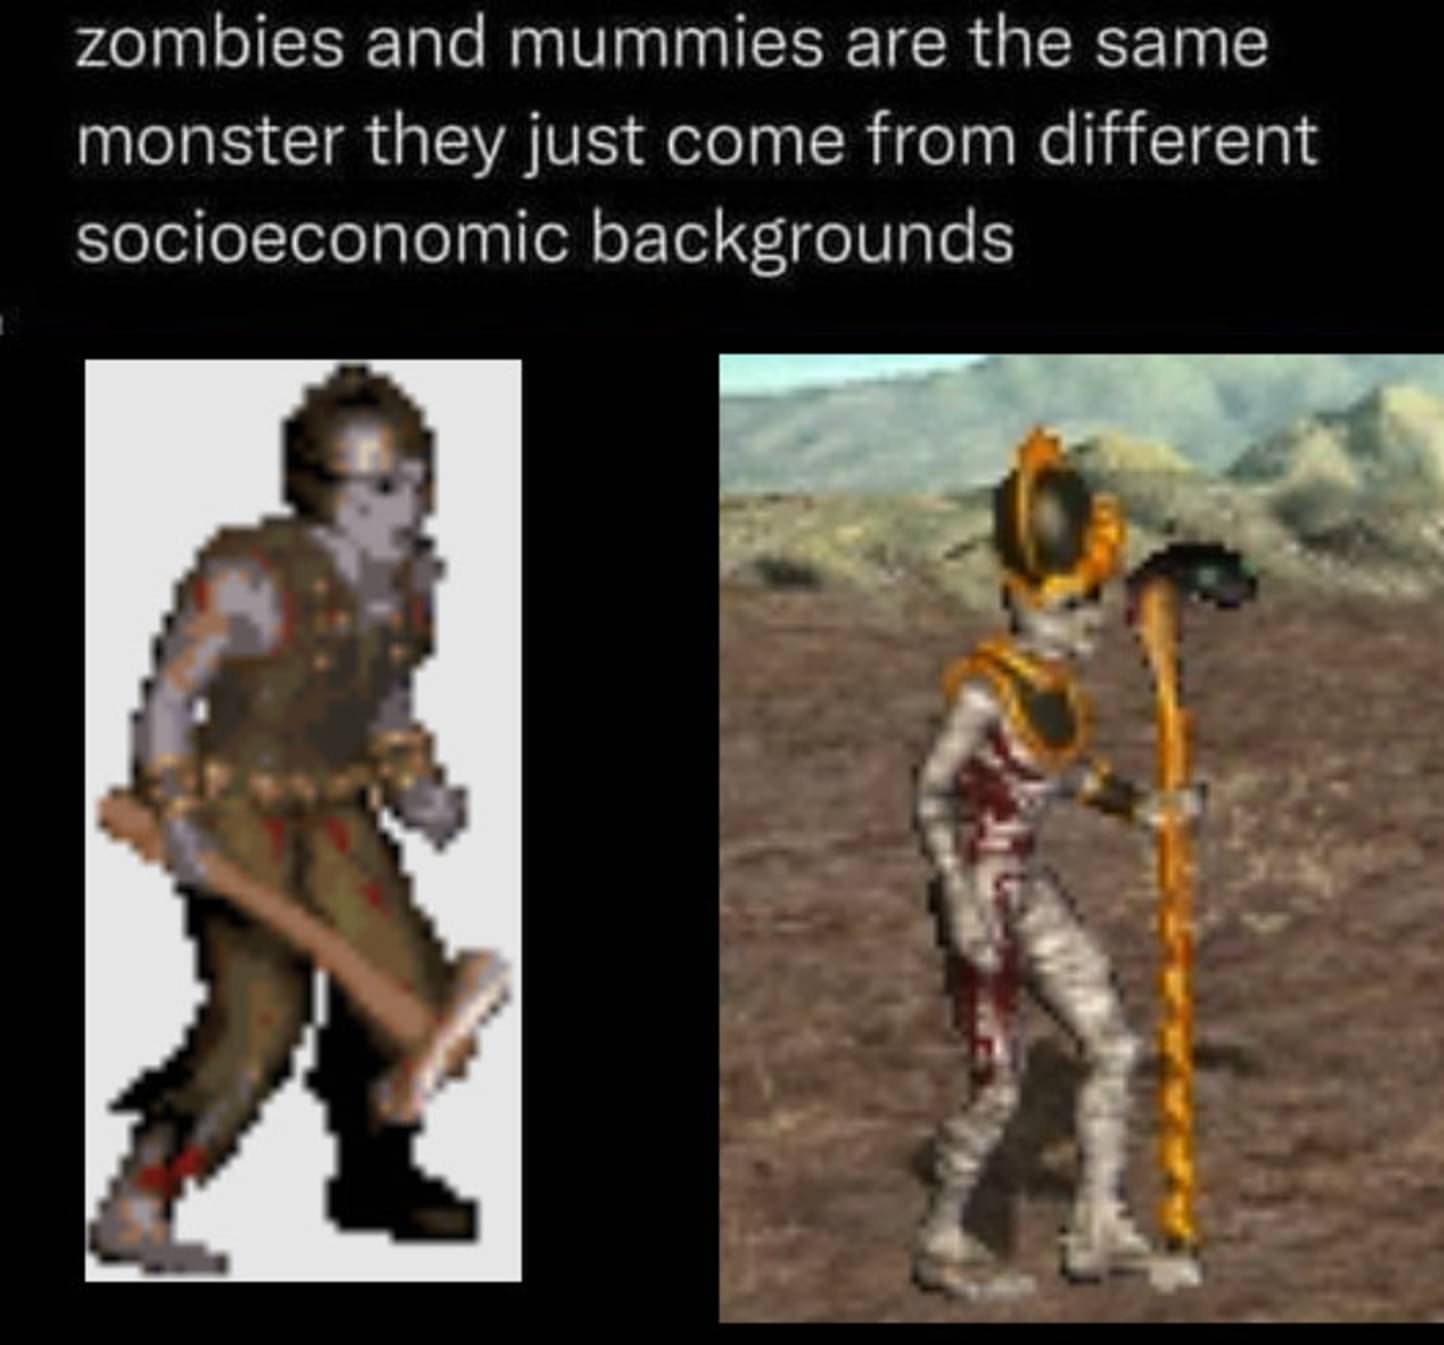 homm3_zombies_and_mummies_are_the_same.jpg